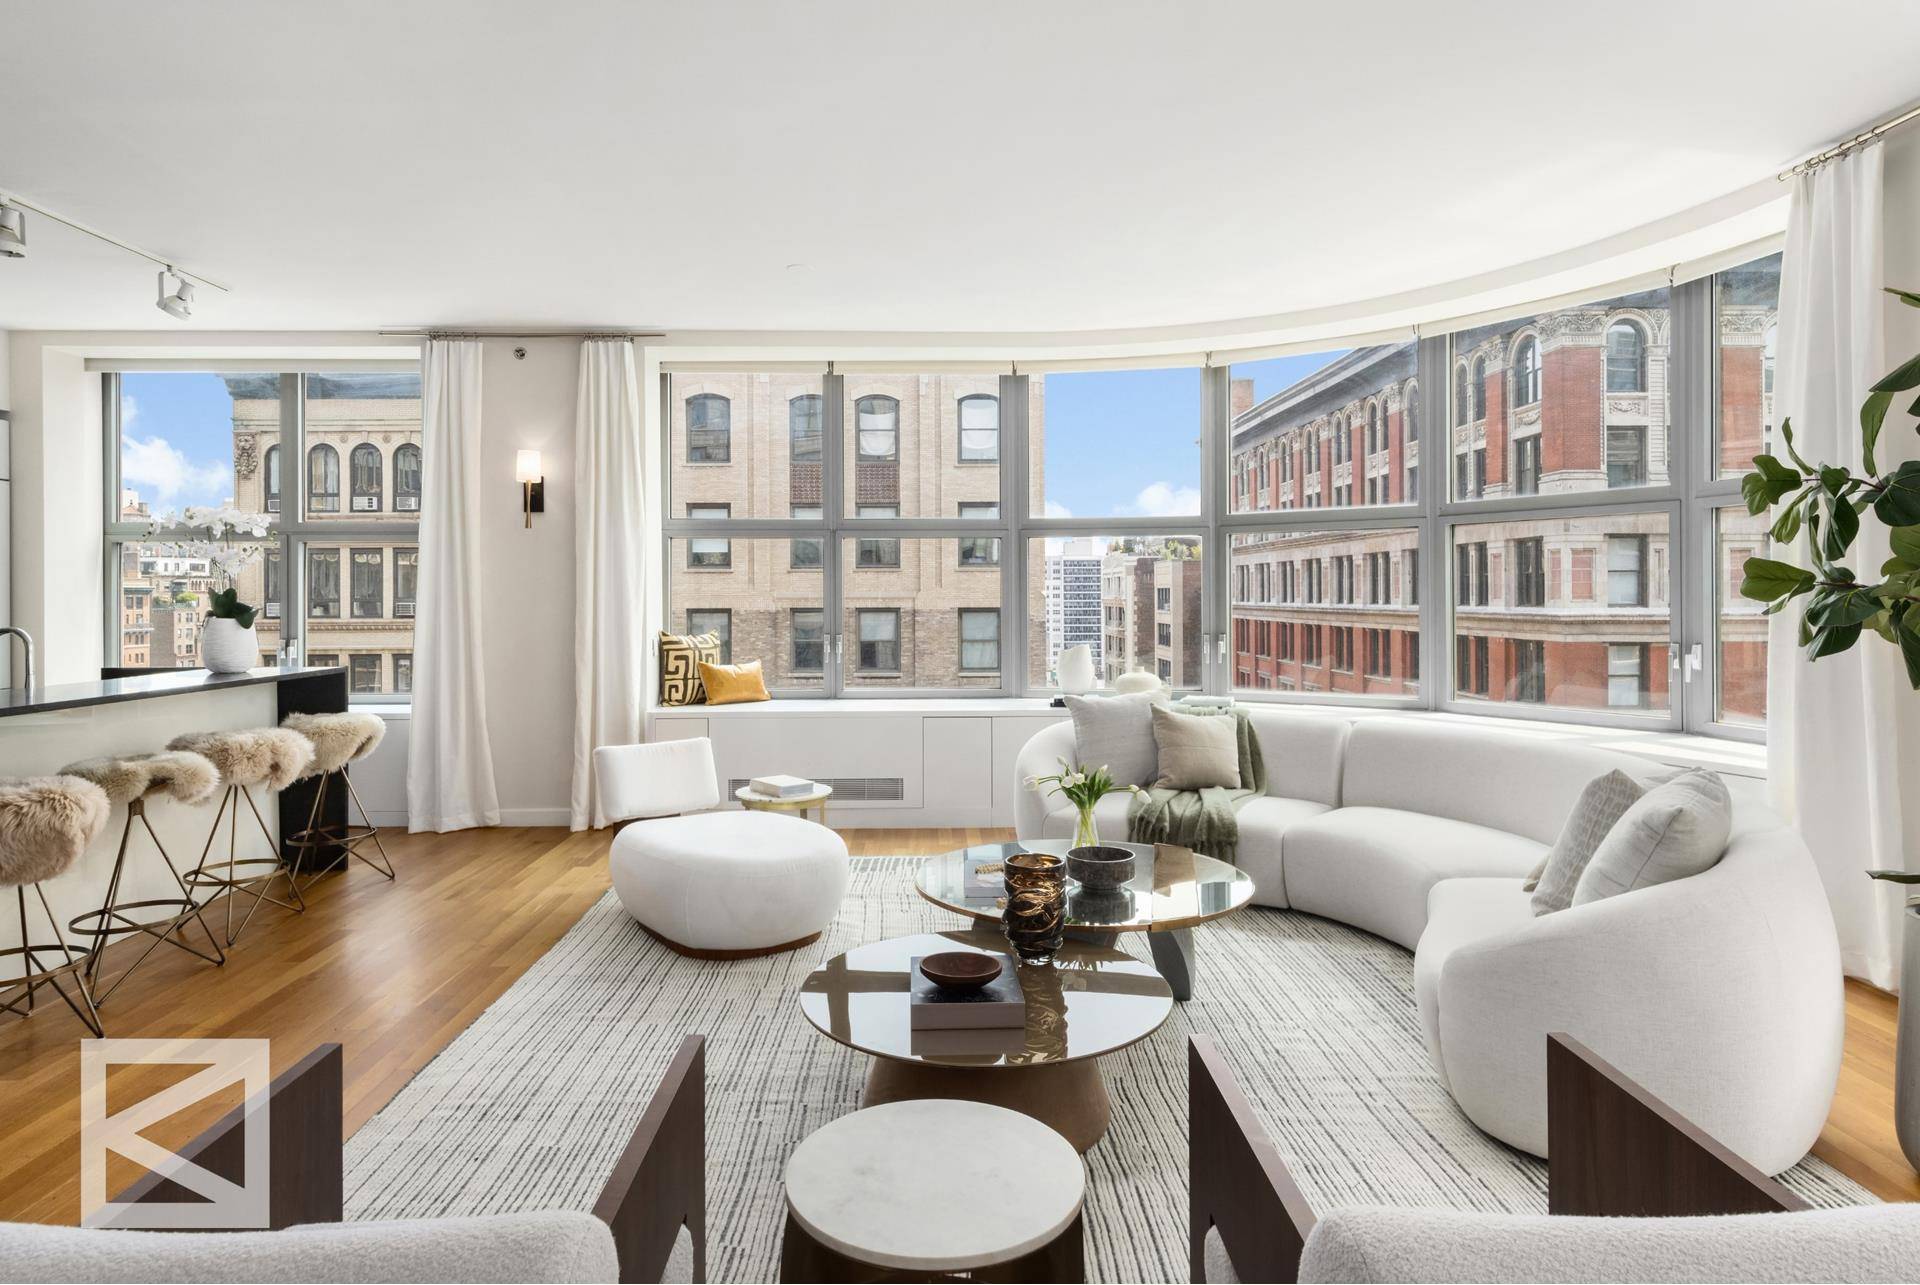 240 Park Avenue South takes full advantage of this coveted corner apex of Park Avenue South.